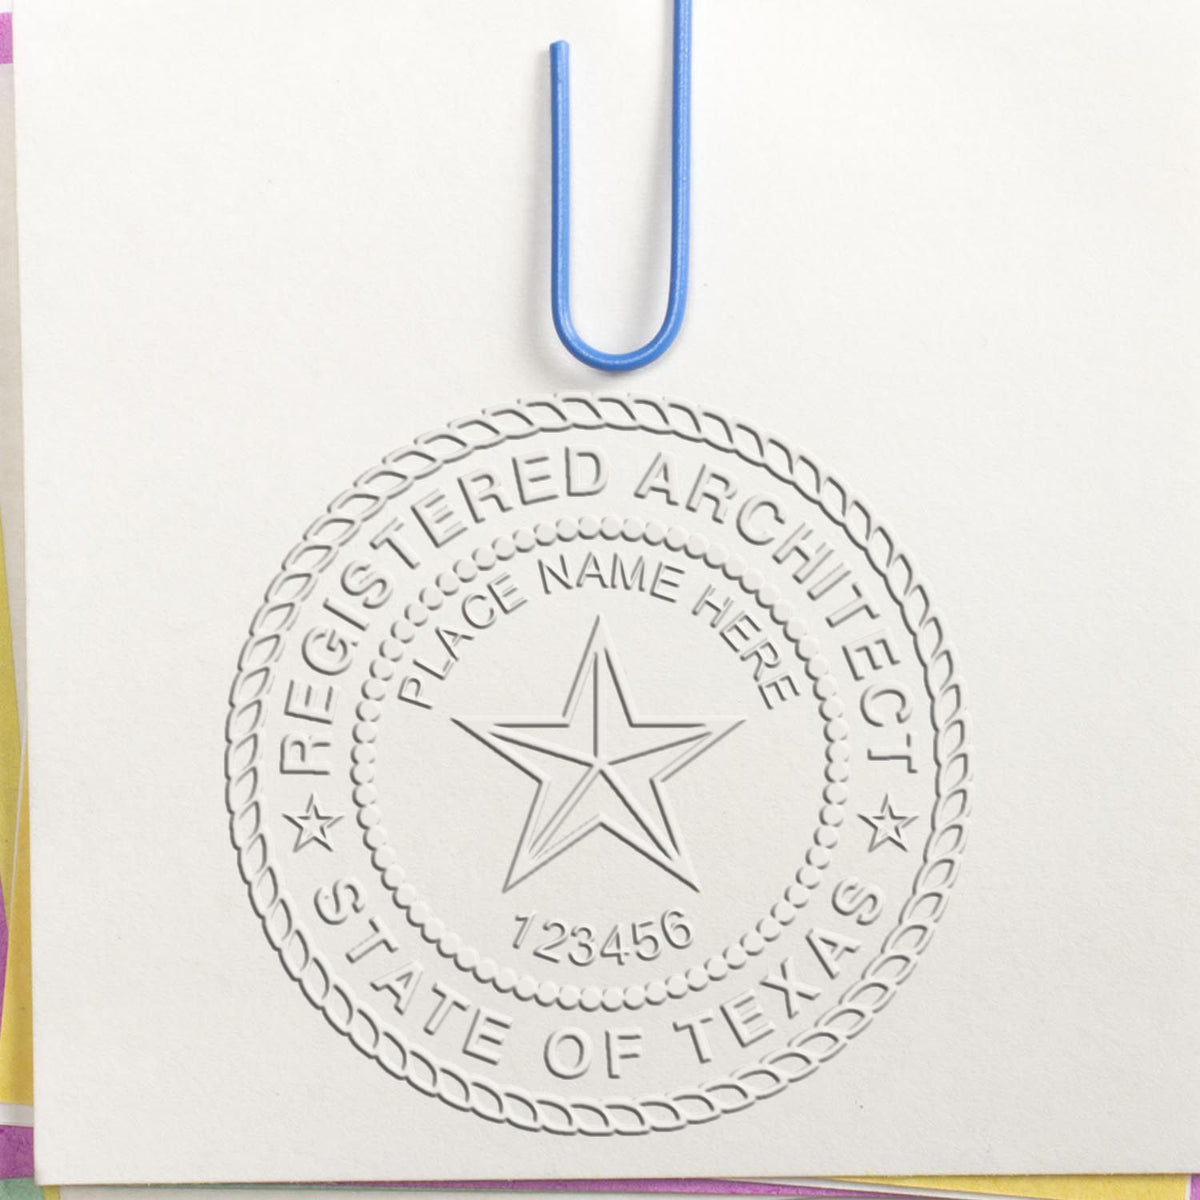 A stamped imprint of the Gift Texas Architect Seal in this stylish lifestyle photo, setting the tone for a unique and personalized product.